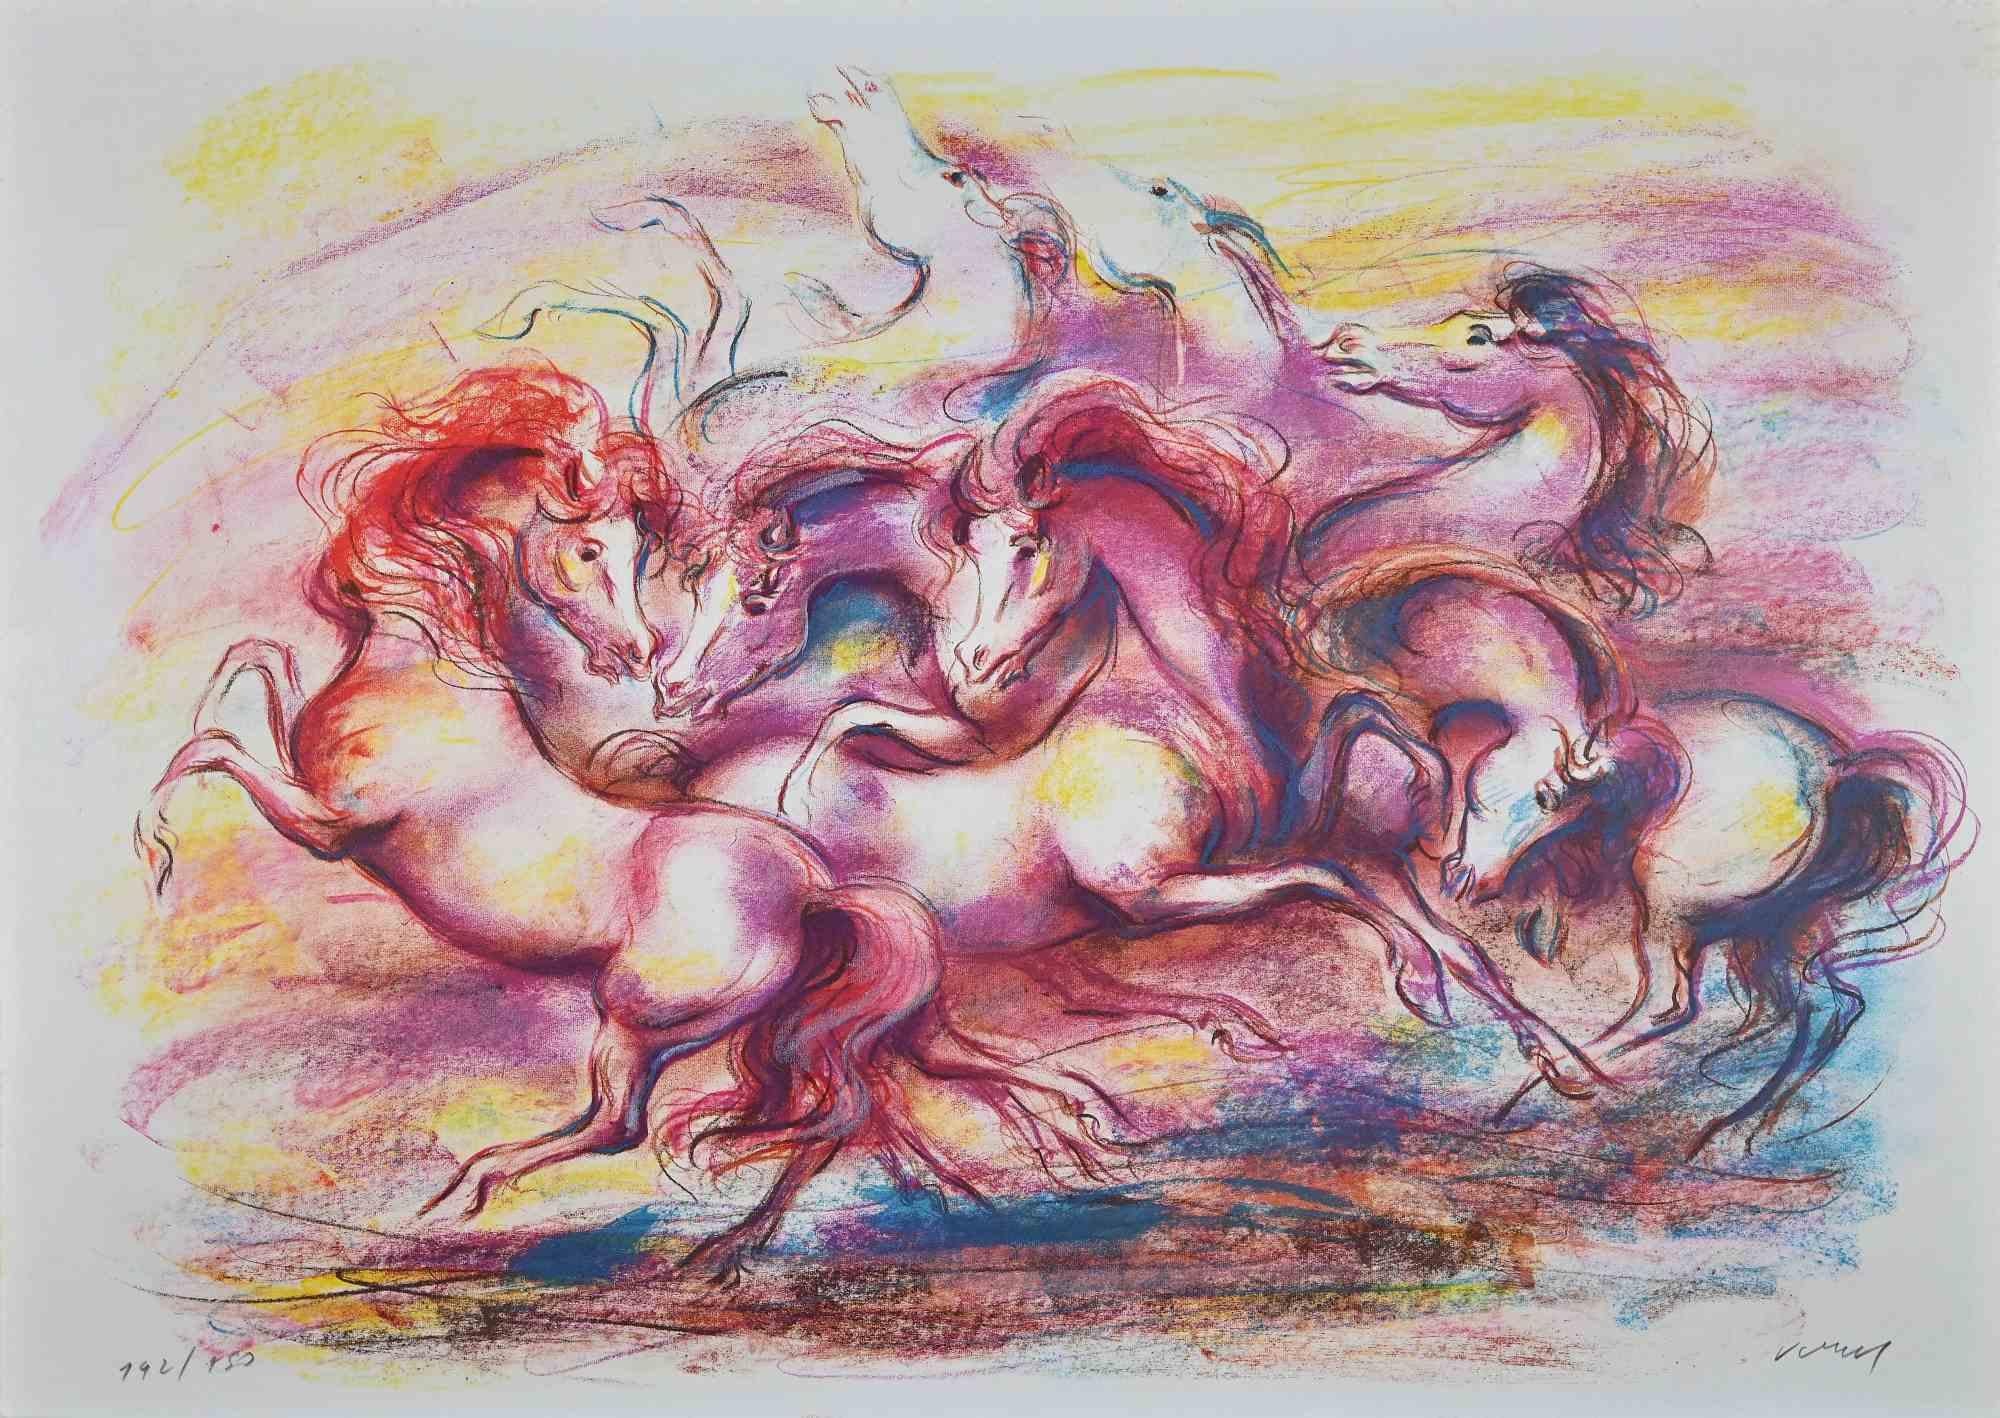 The Dance Of Horses  - Original Lithograph by Jovan Vulic - 1980s